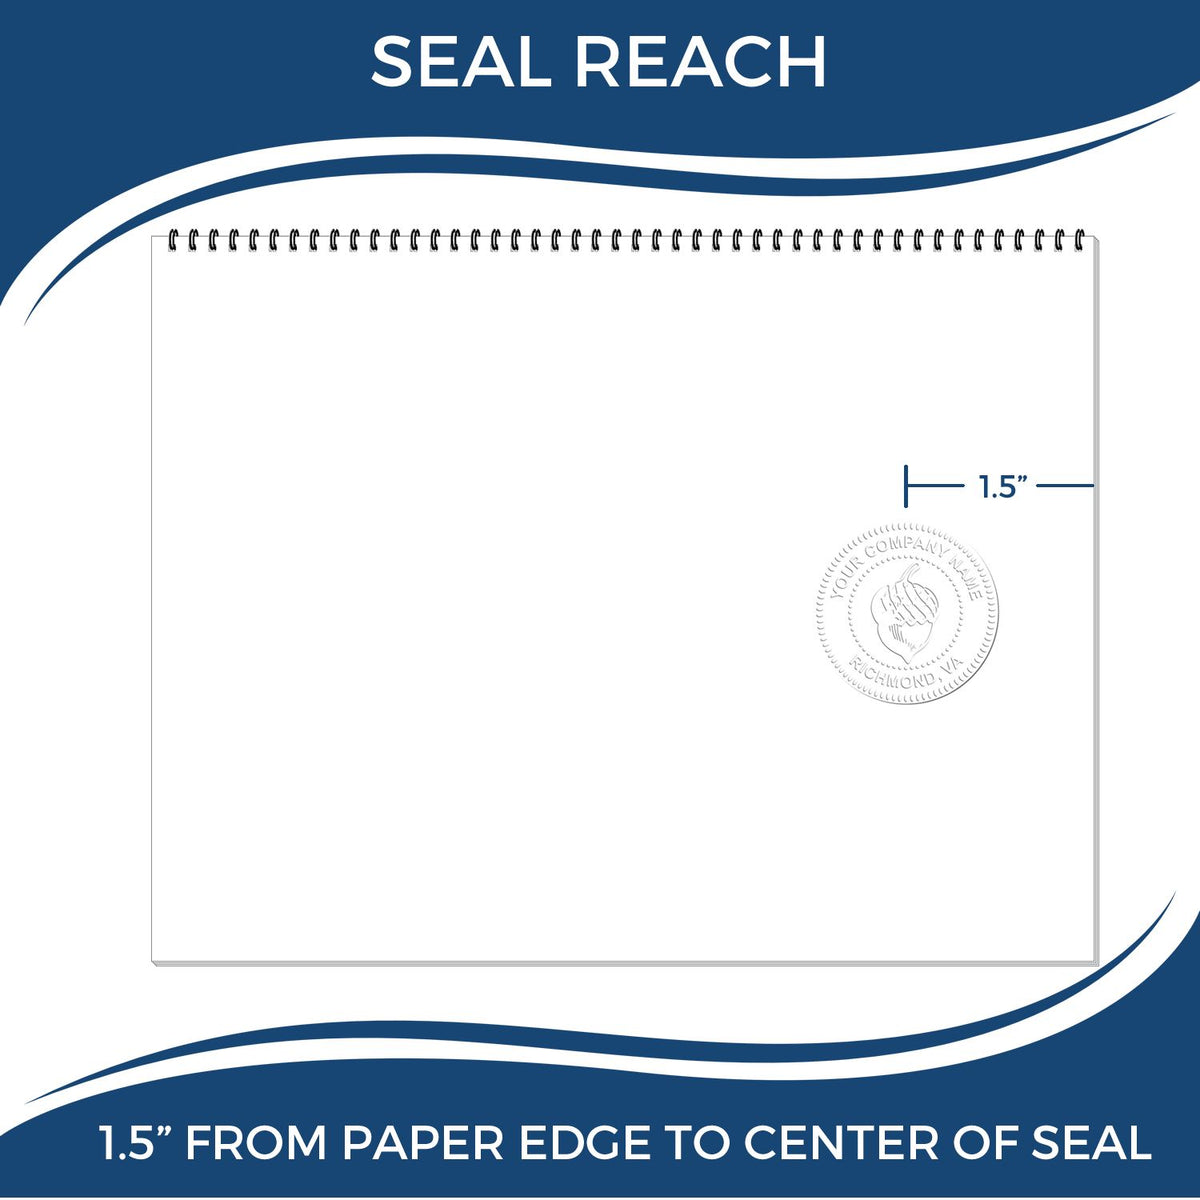 An infographic showing the seal reach which is represented by a ruler and a miniature seal image of the Hybrid District of Columbia Engineer Seal